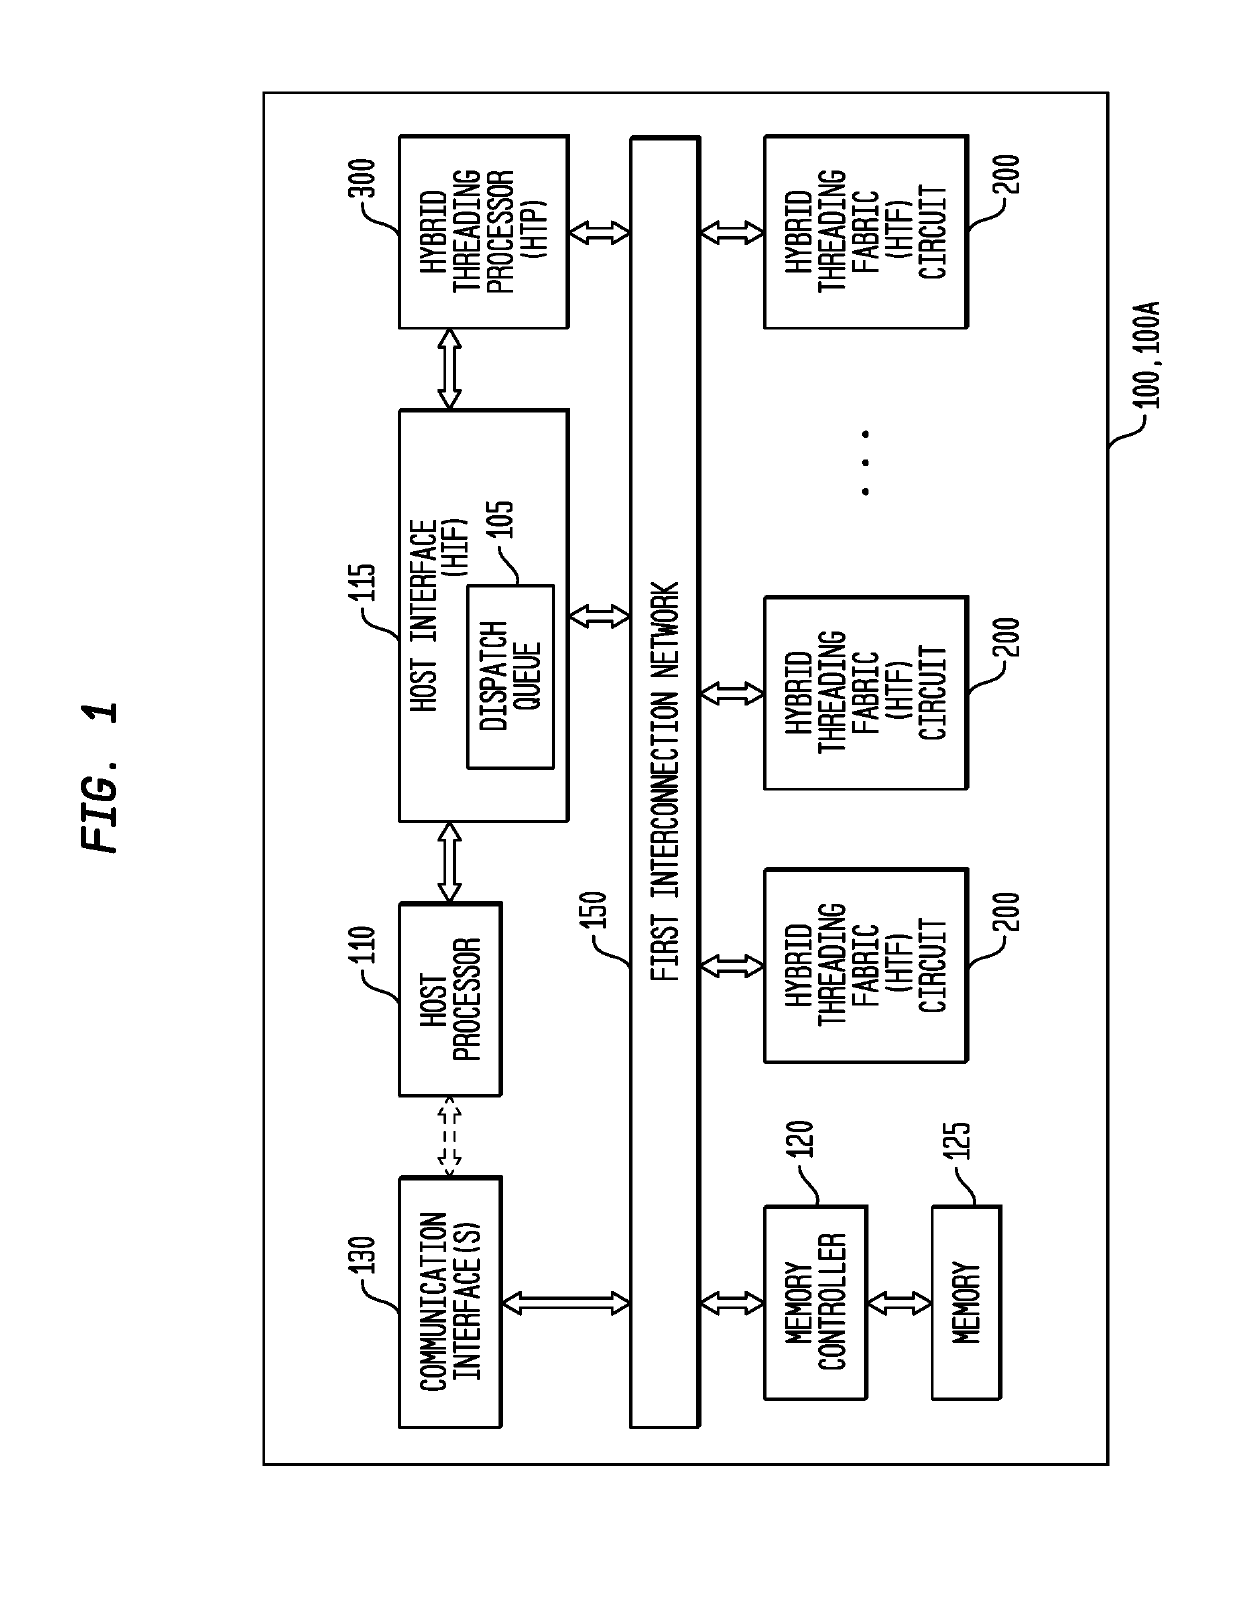 Execution Control of a Multi-Threaded, Self-Scheduling Reconfigurable Computing Fabric